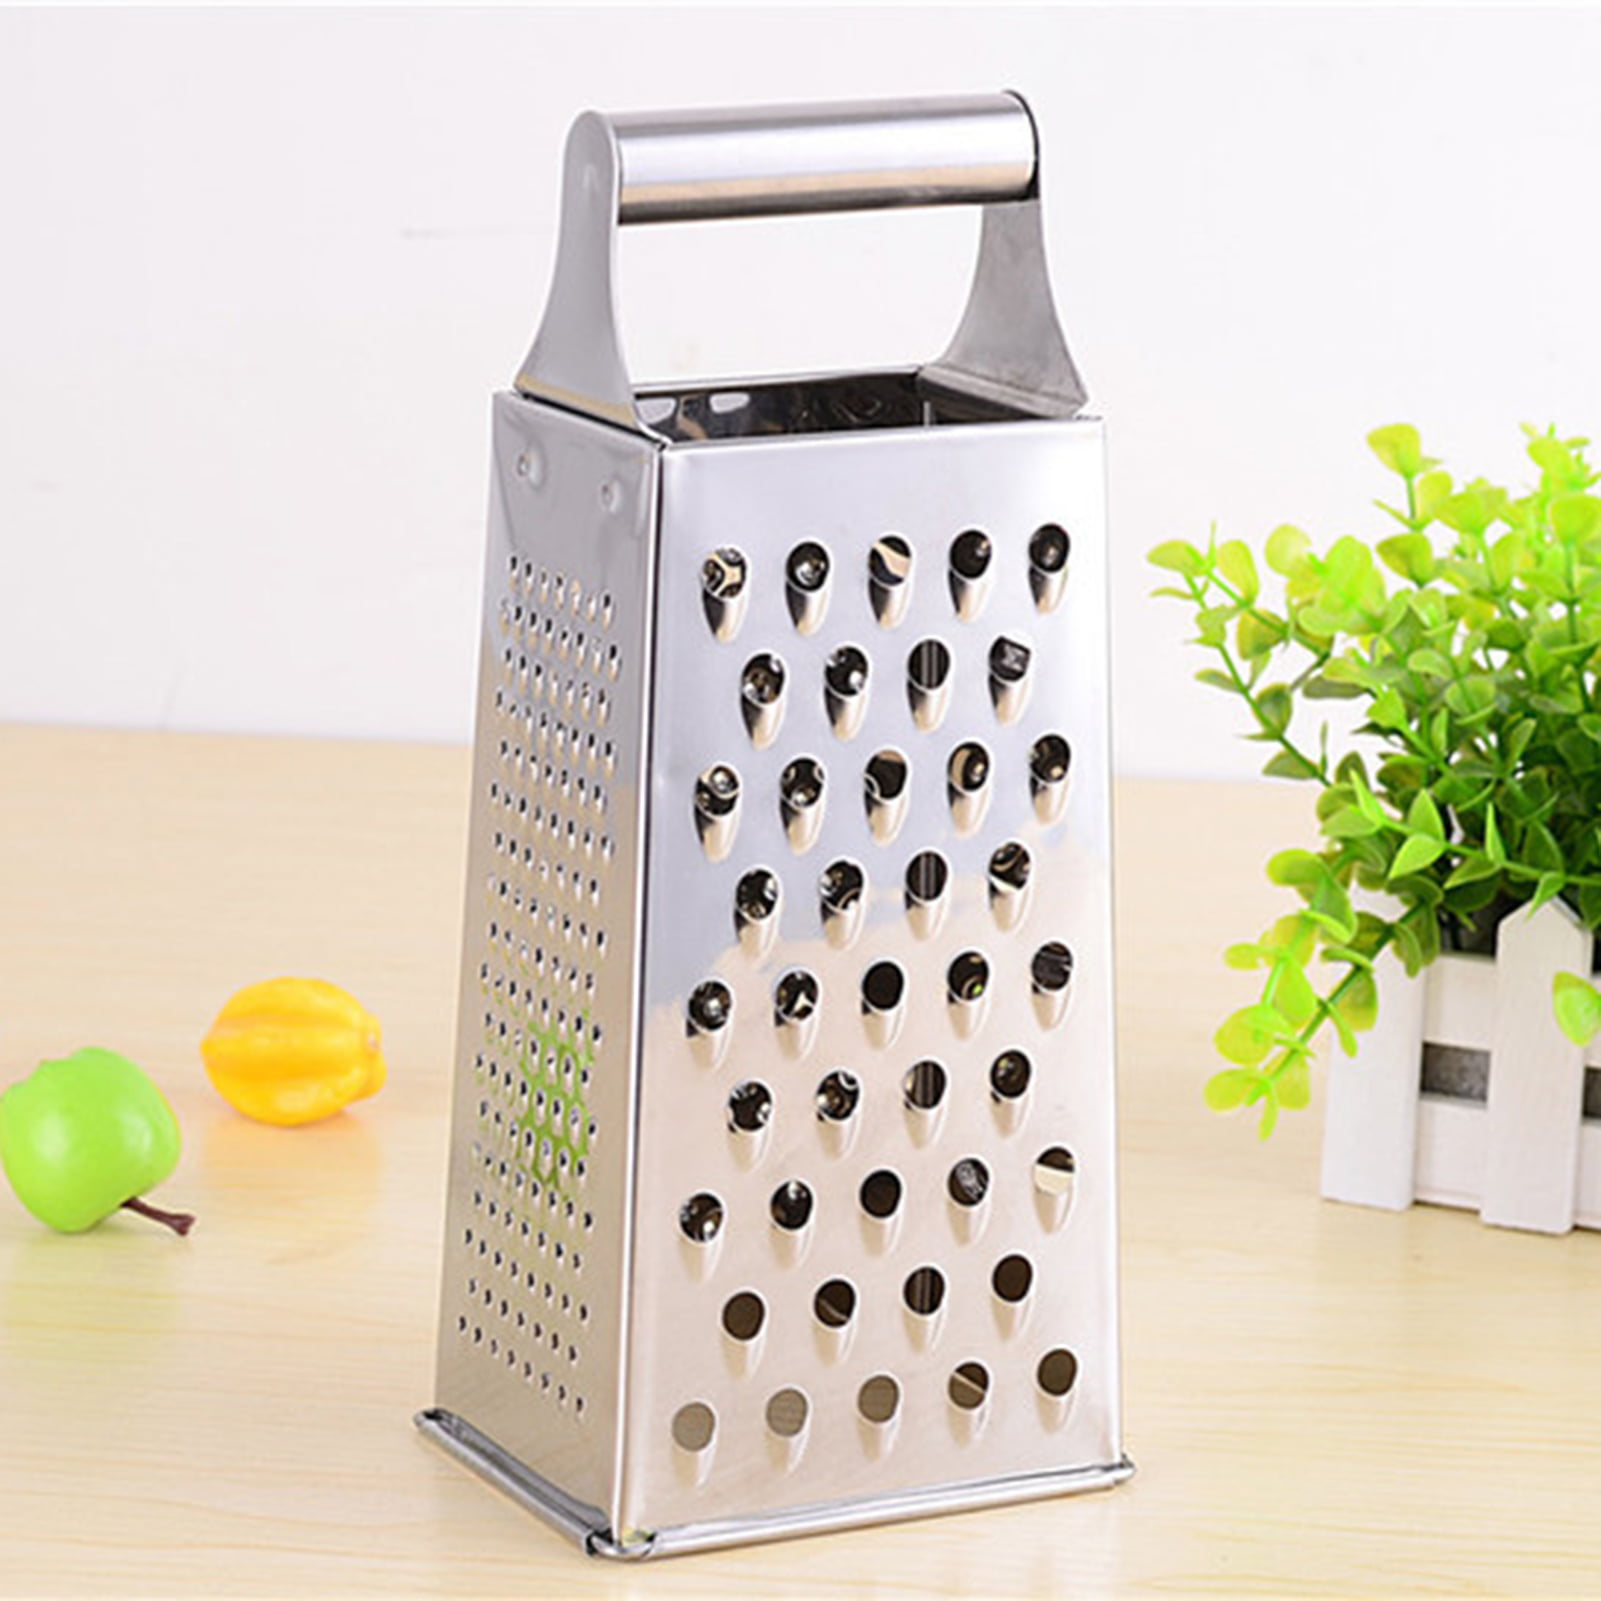  Tablecraft Stainless Steel Cheese Grater, Professional Handheld  4 Sided Kitchen Shredder Peeler Shaver Box, Best for Parmesan Cheese,  Vegetables, Spices, Herbs, Handle with Non-Slip Base, Small 6 : Home &  Kitchen